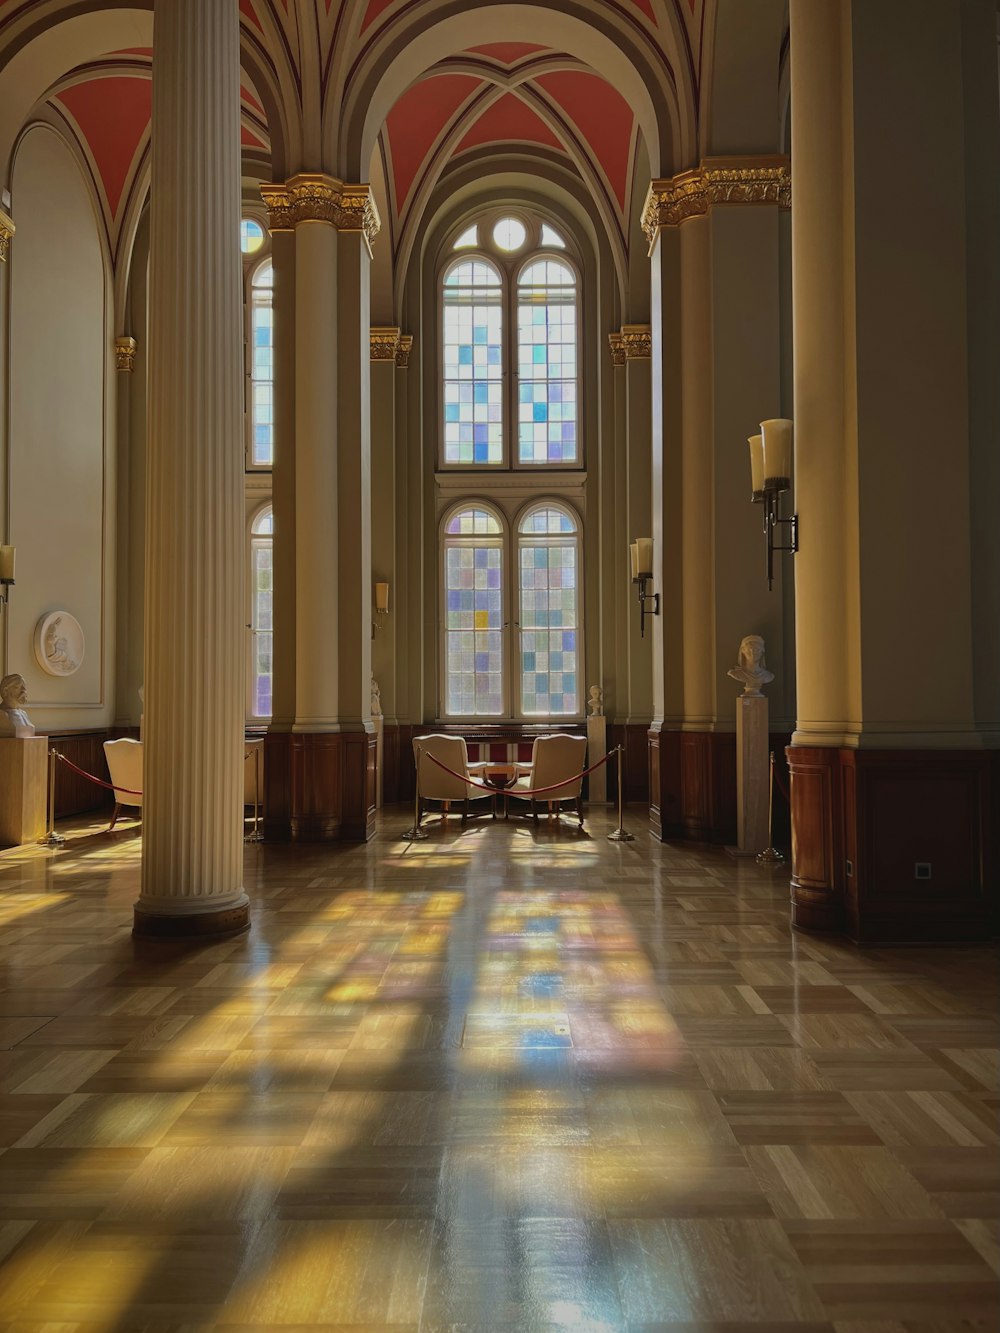 a large room with columns and stained glass windows